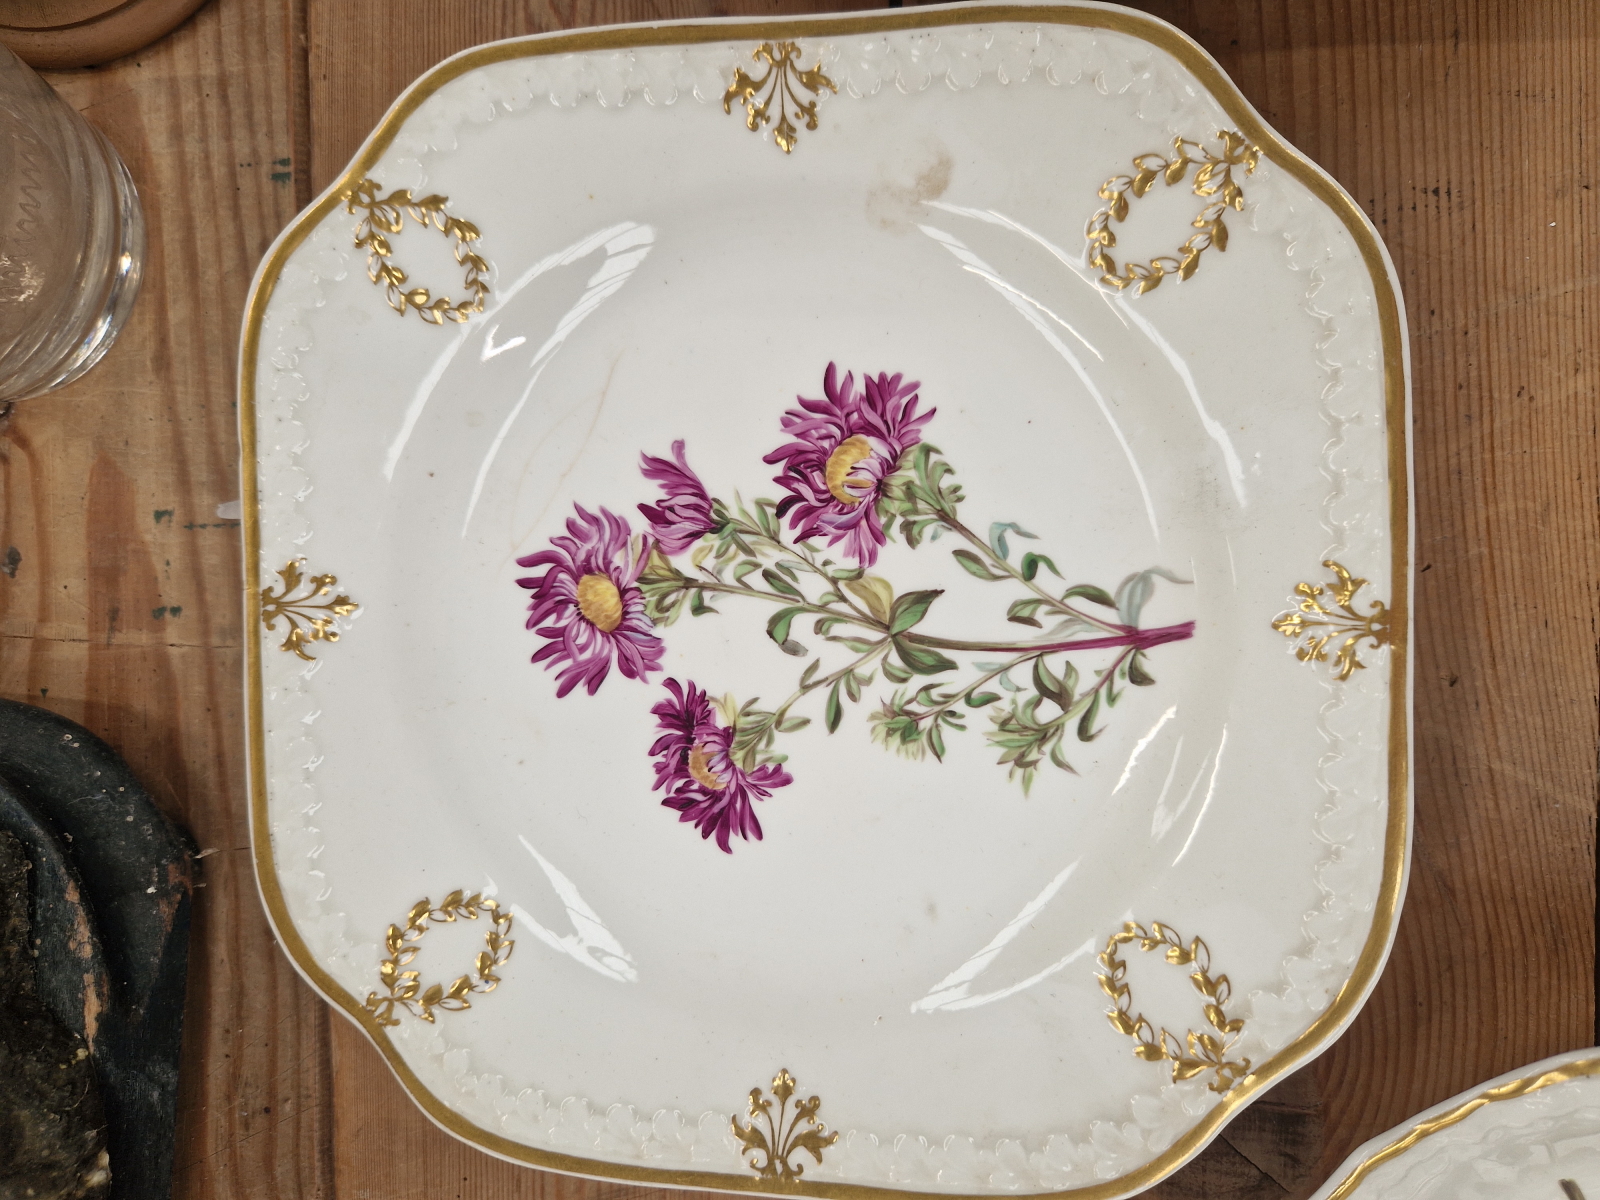 A FINE EARLY 19th C. PORCELAIN DESSERT SERVICE, HAND PAINTED WITH NAMED FLORAL BOTANICAL SPECIMENS - Image 29 of 58